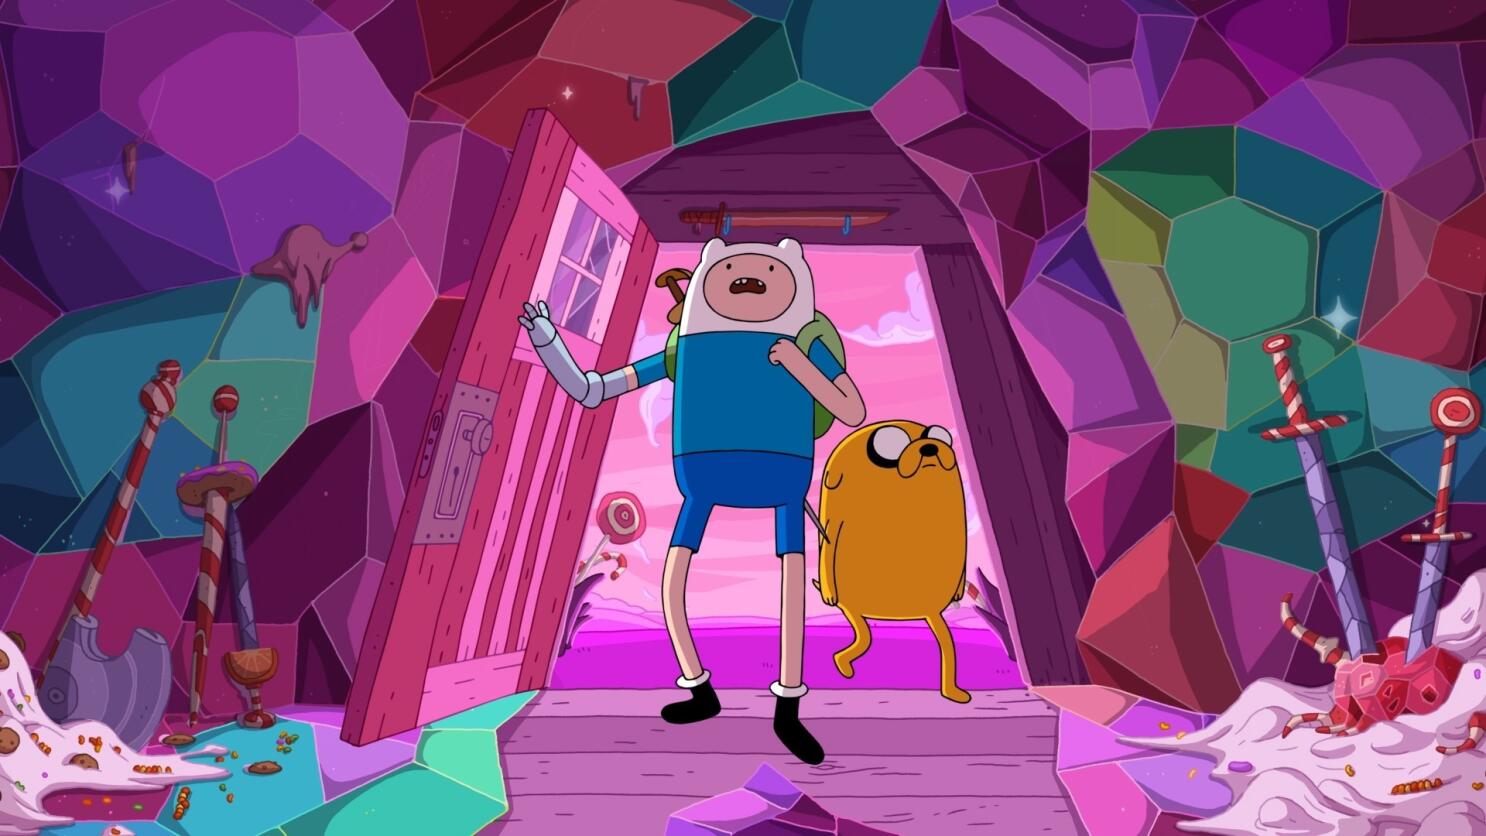 Adventure Time Game Wizard - Draw Your Own Adventure Time Games